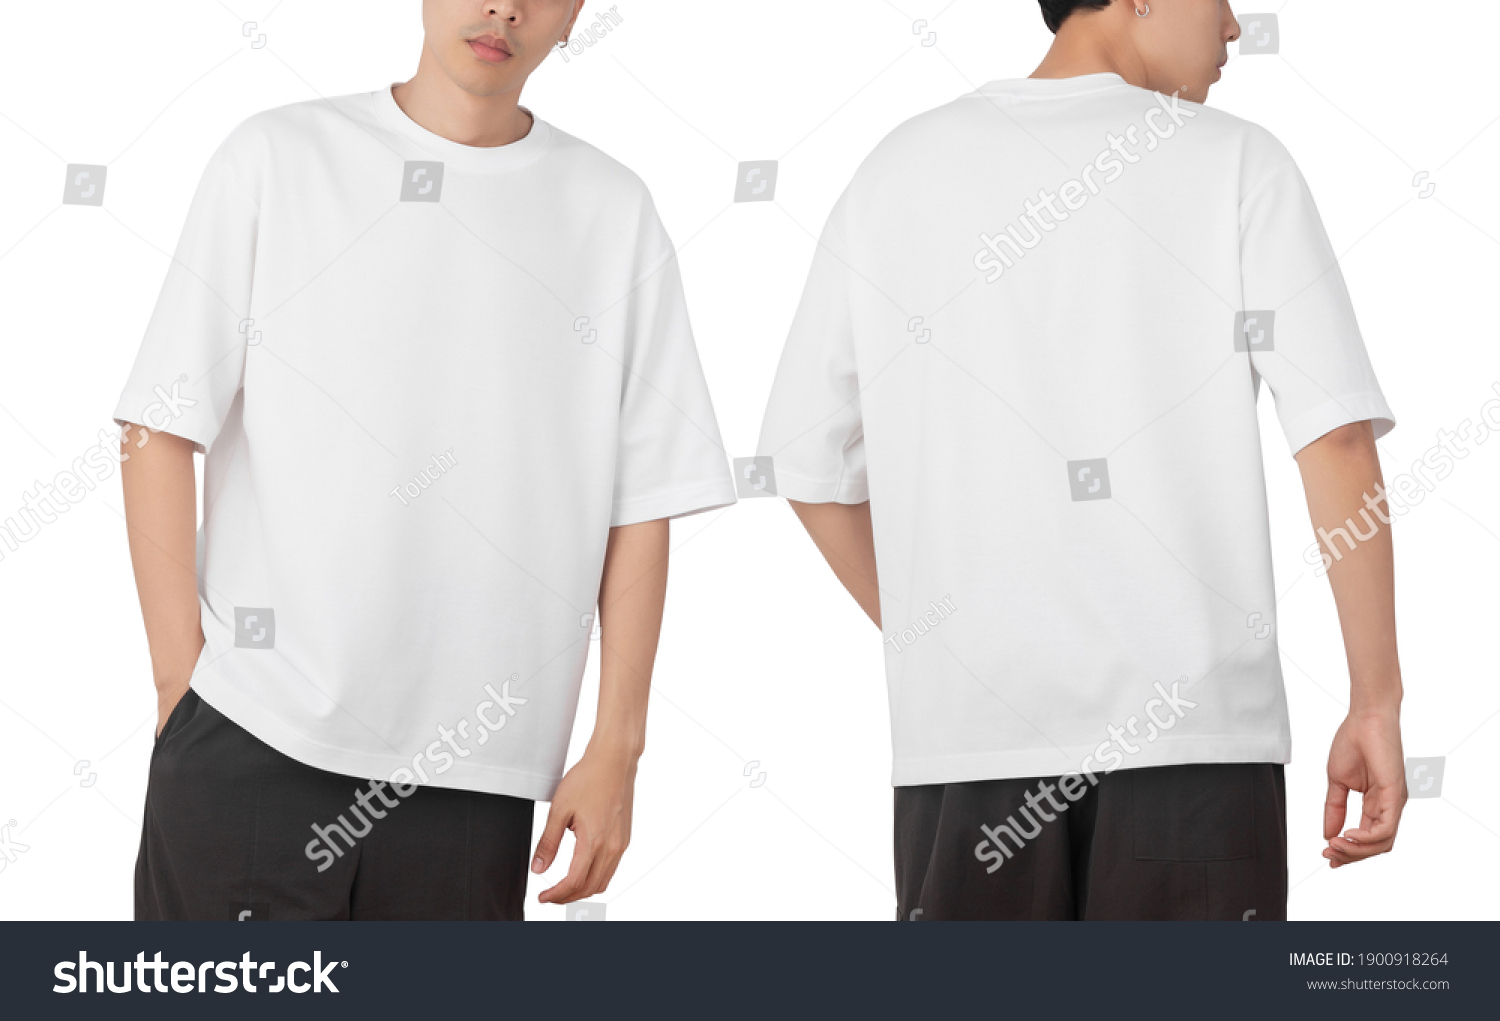 Young man in blank oversize t-shirt mockup front and back used as design template, isolated on white background with clipping path. #1900918264